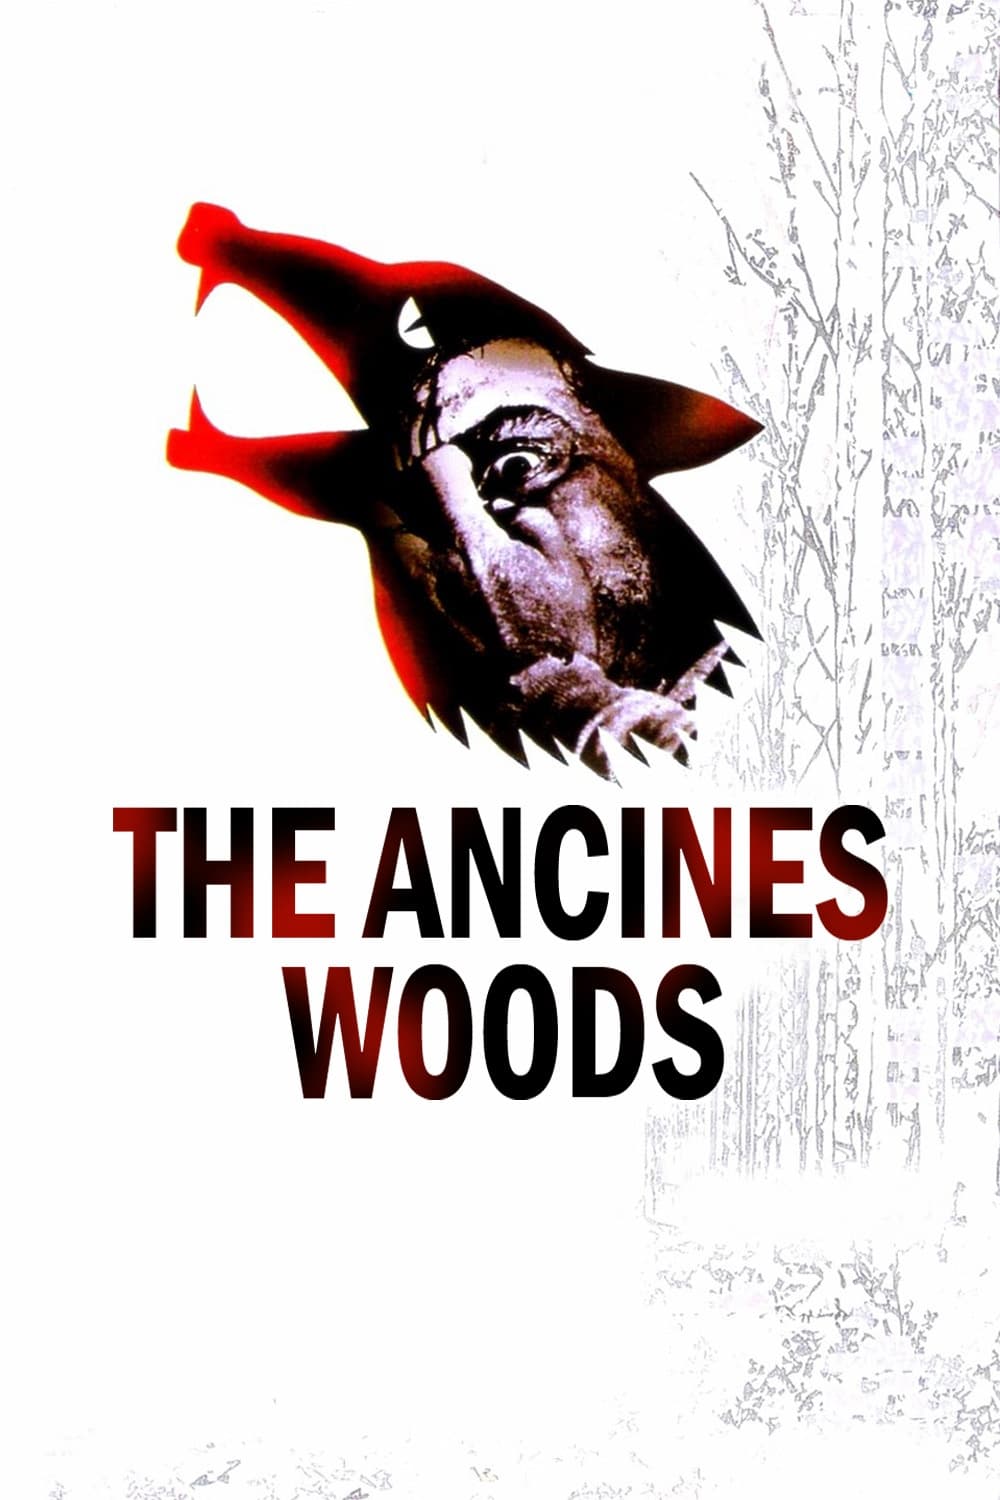 The Ancines Woods (1970)